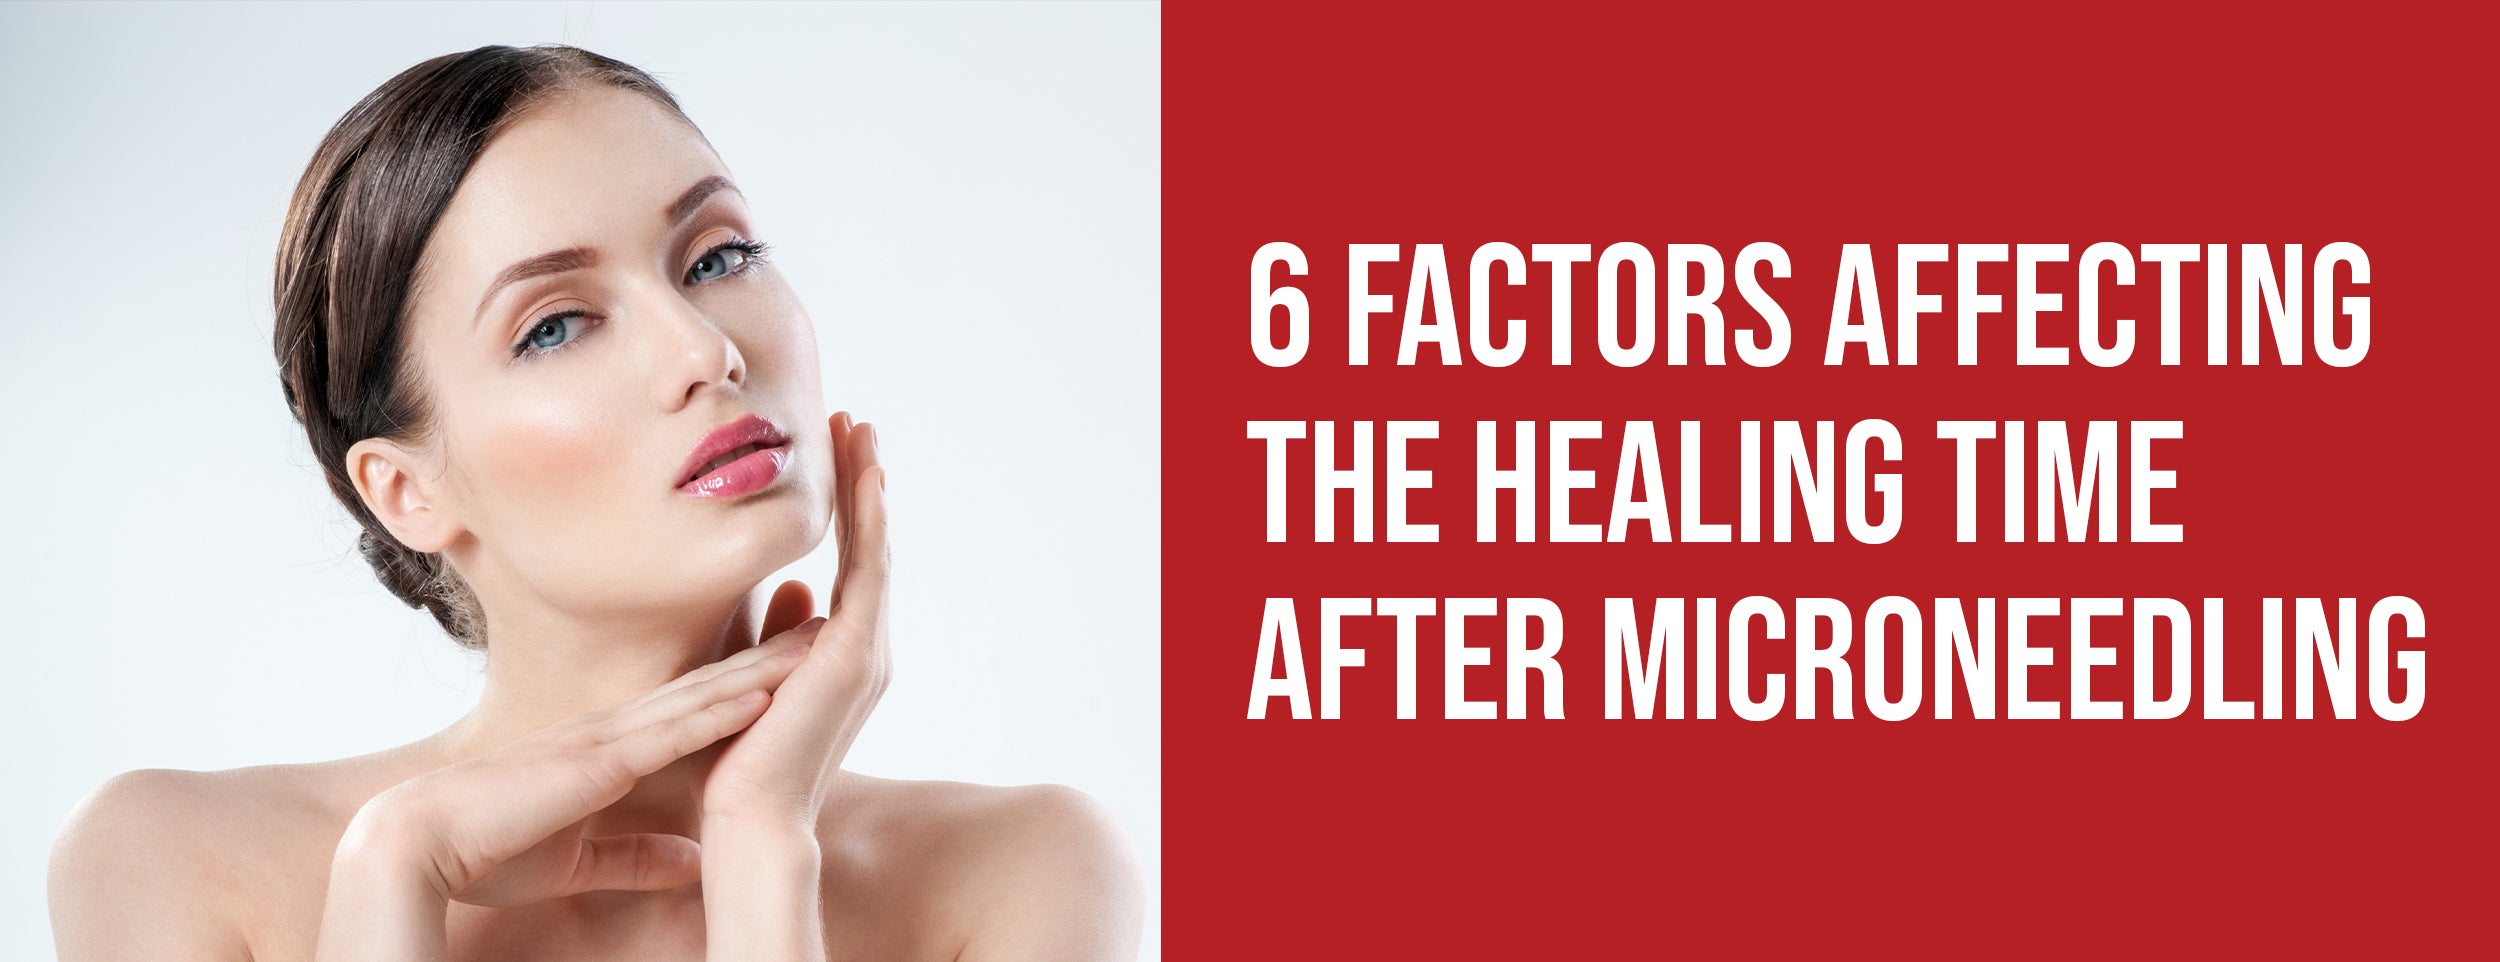 6 Factors Affecting the Healing Time After Microneedling